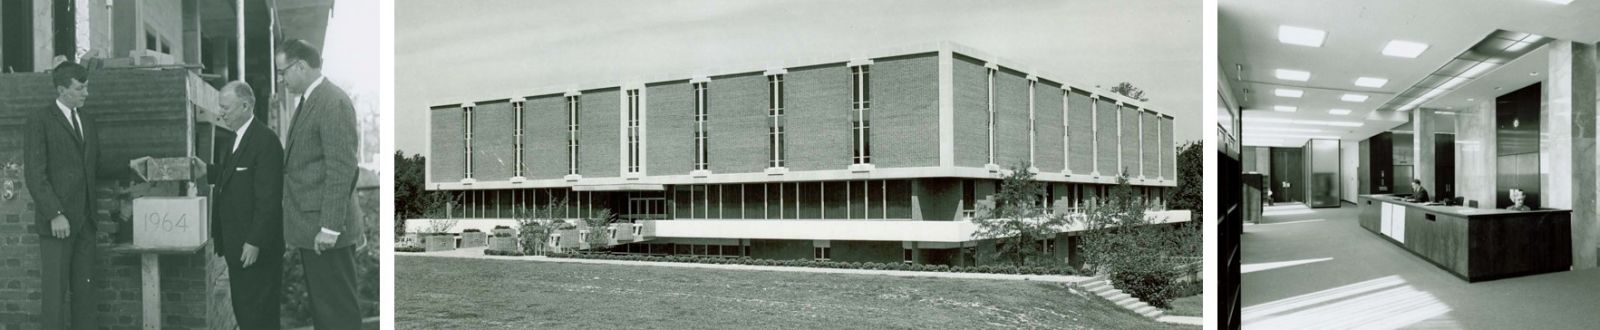 Three photos from left to right: three people placing the cornerstone of Swem Library, the exterior of Swem, and the circulation desk from the 1960s.